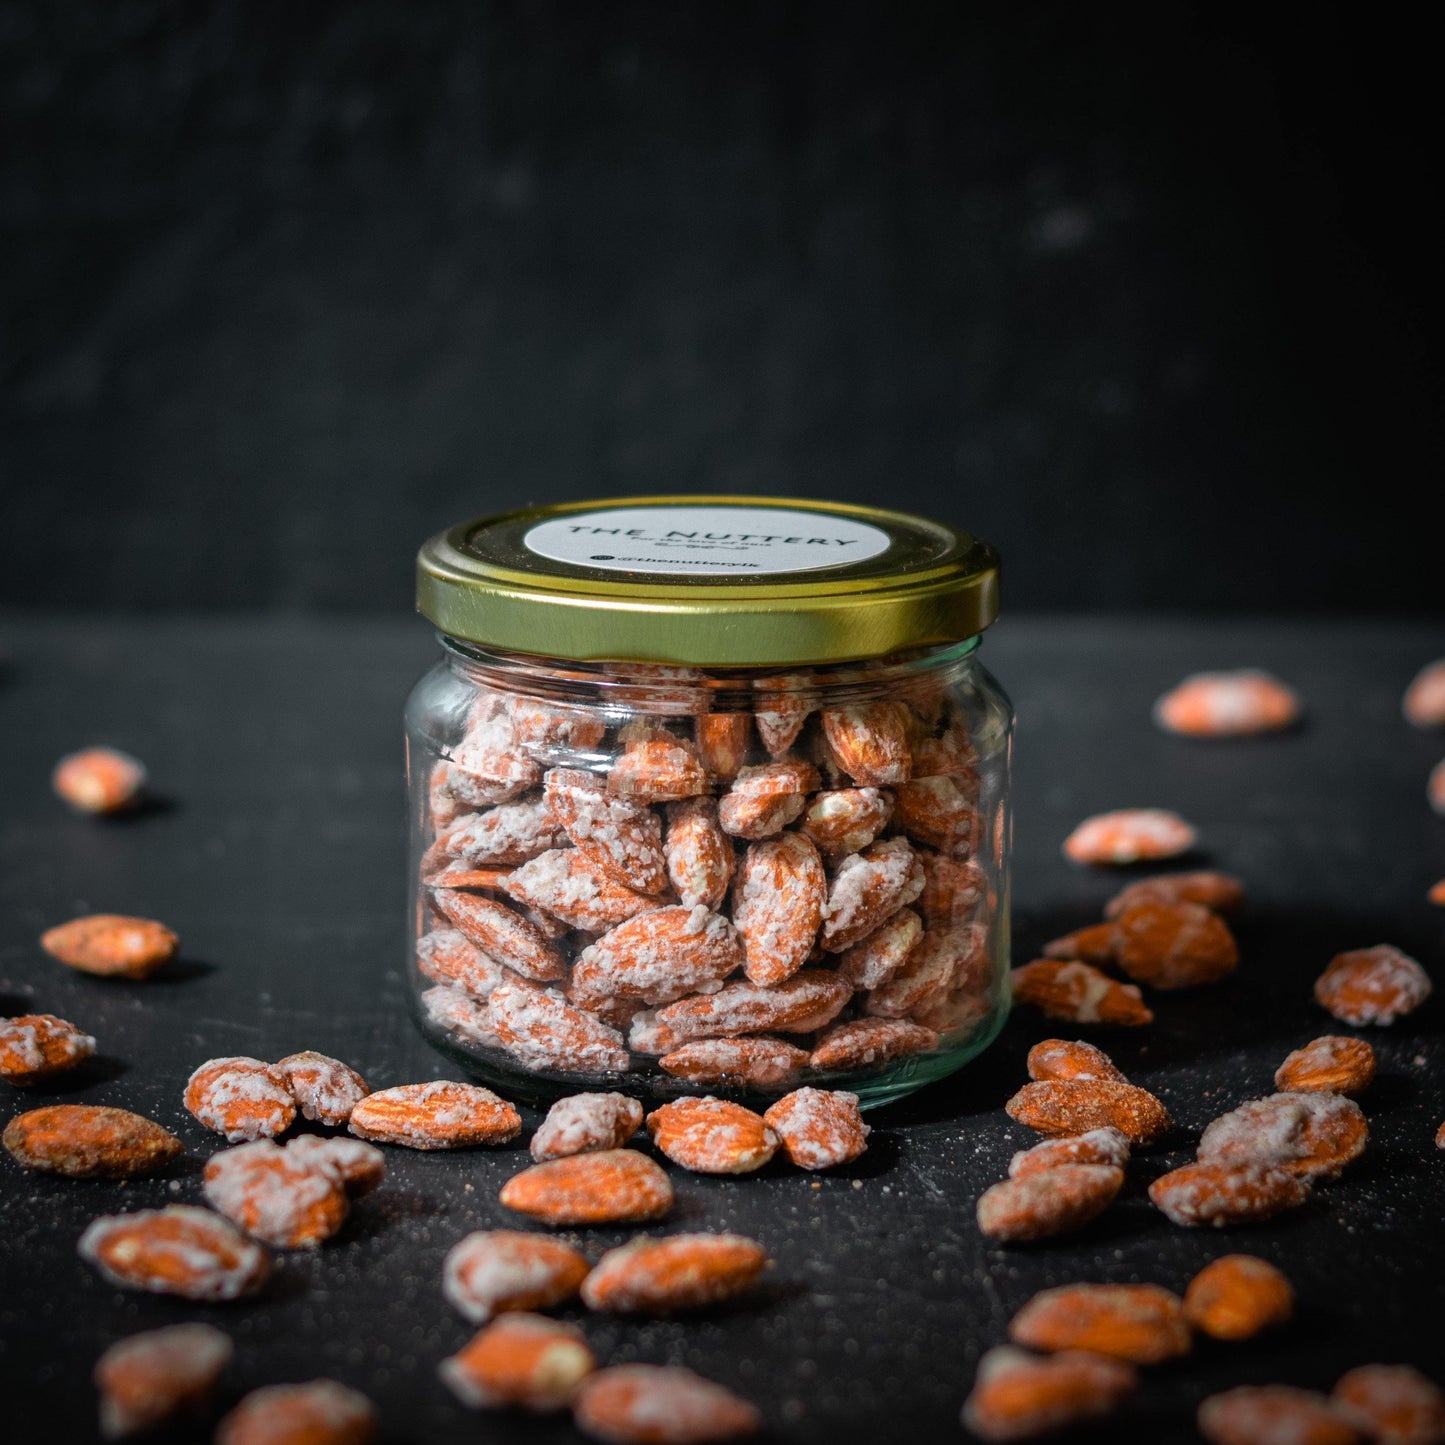 Candied Almonds (Sugar coated) - The Nuttery